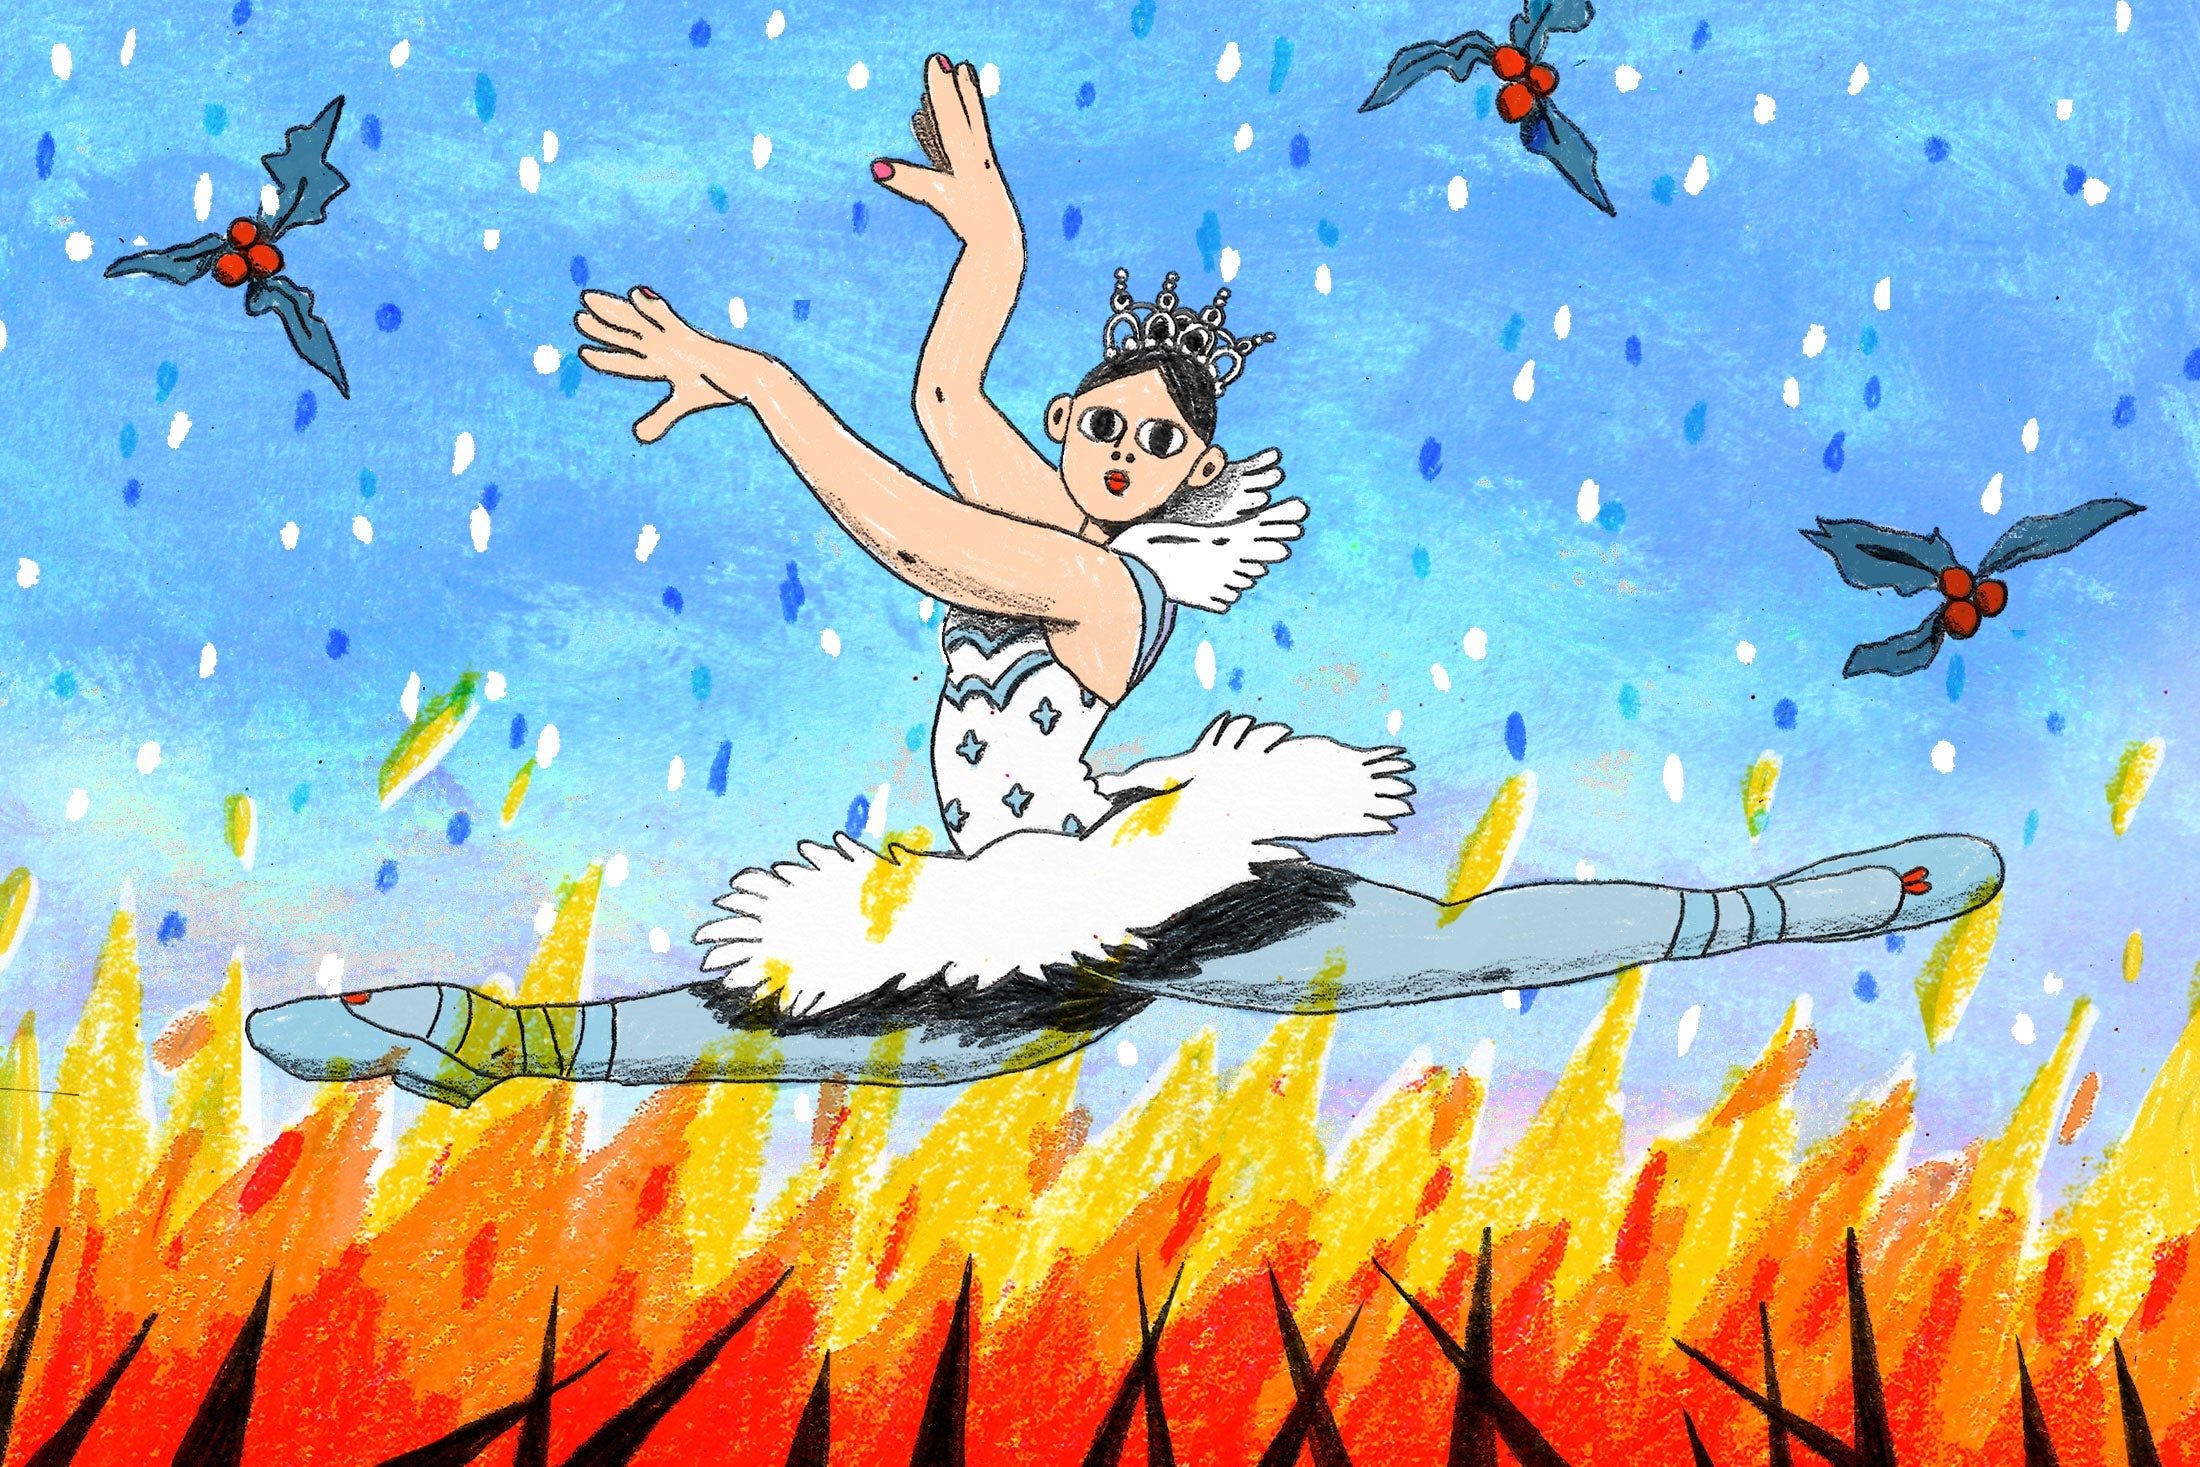 Illustration of a ballerina dancing above flames and beneath snow and mistletoe.